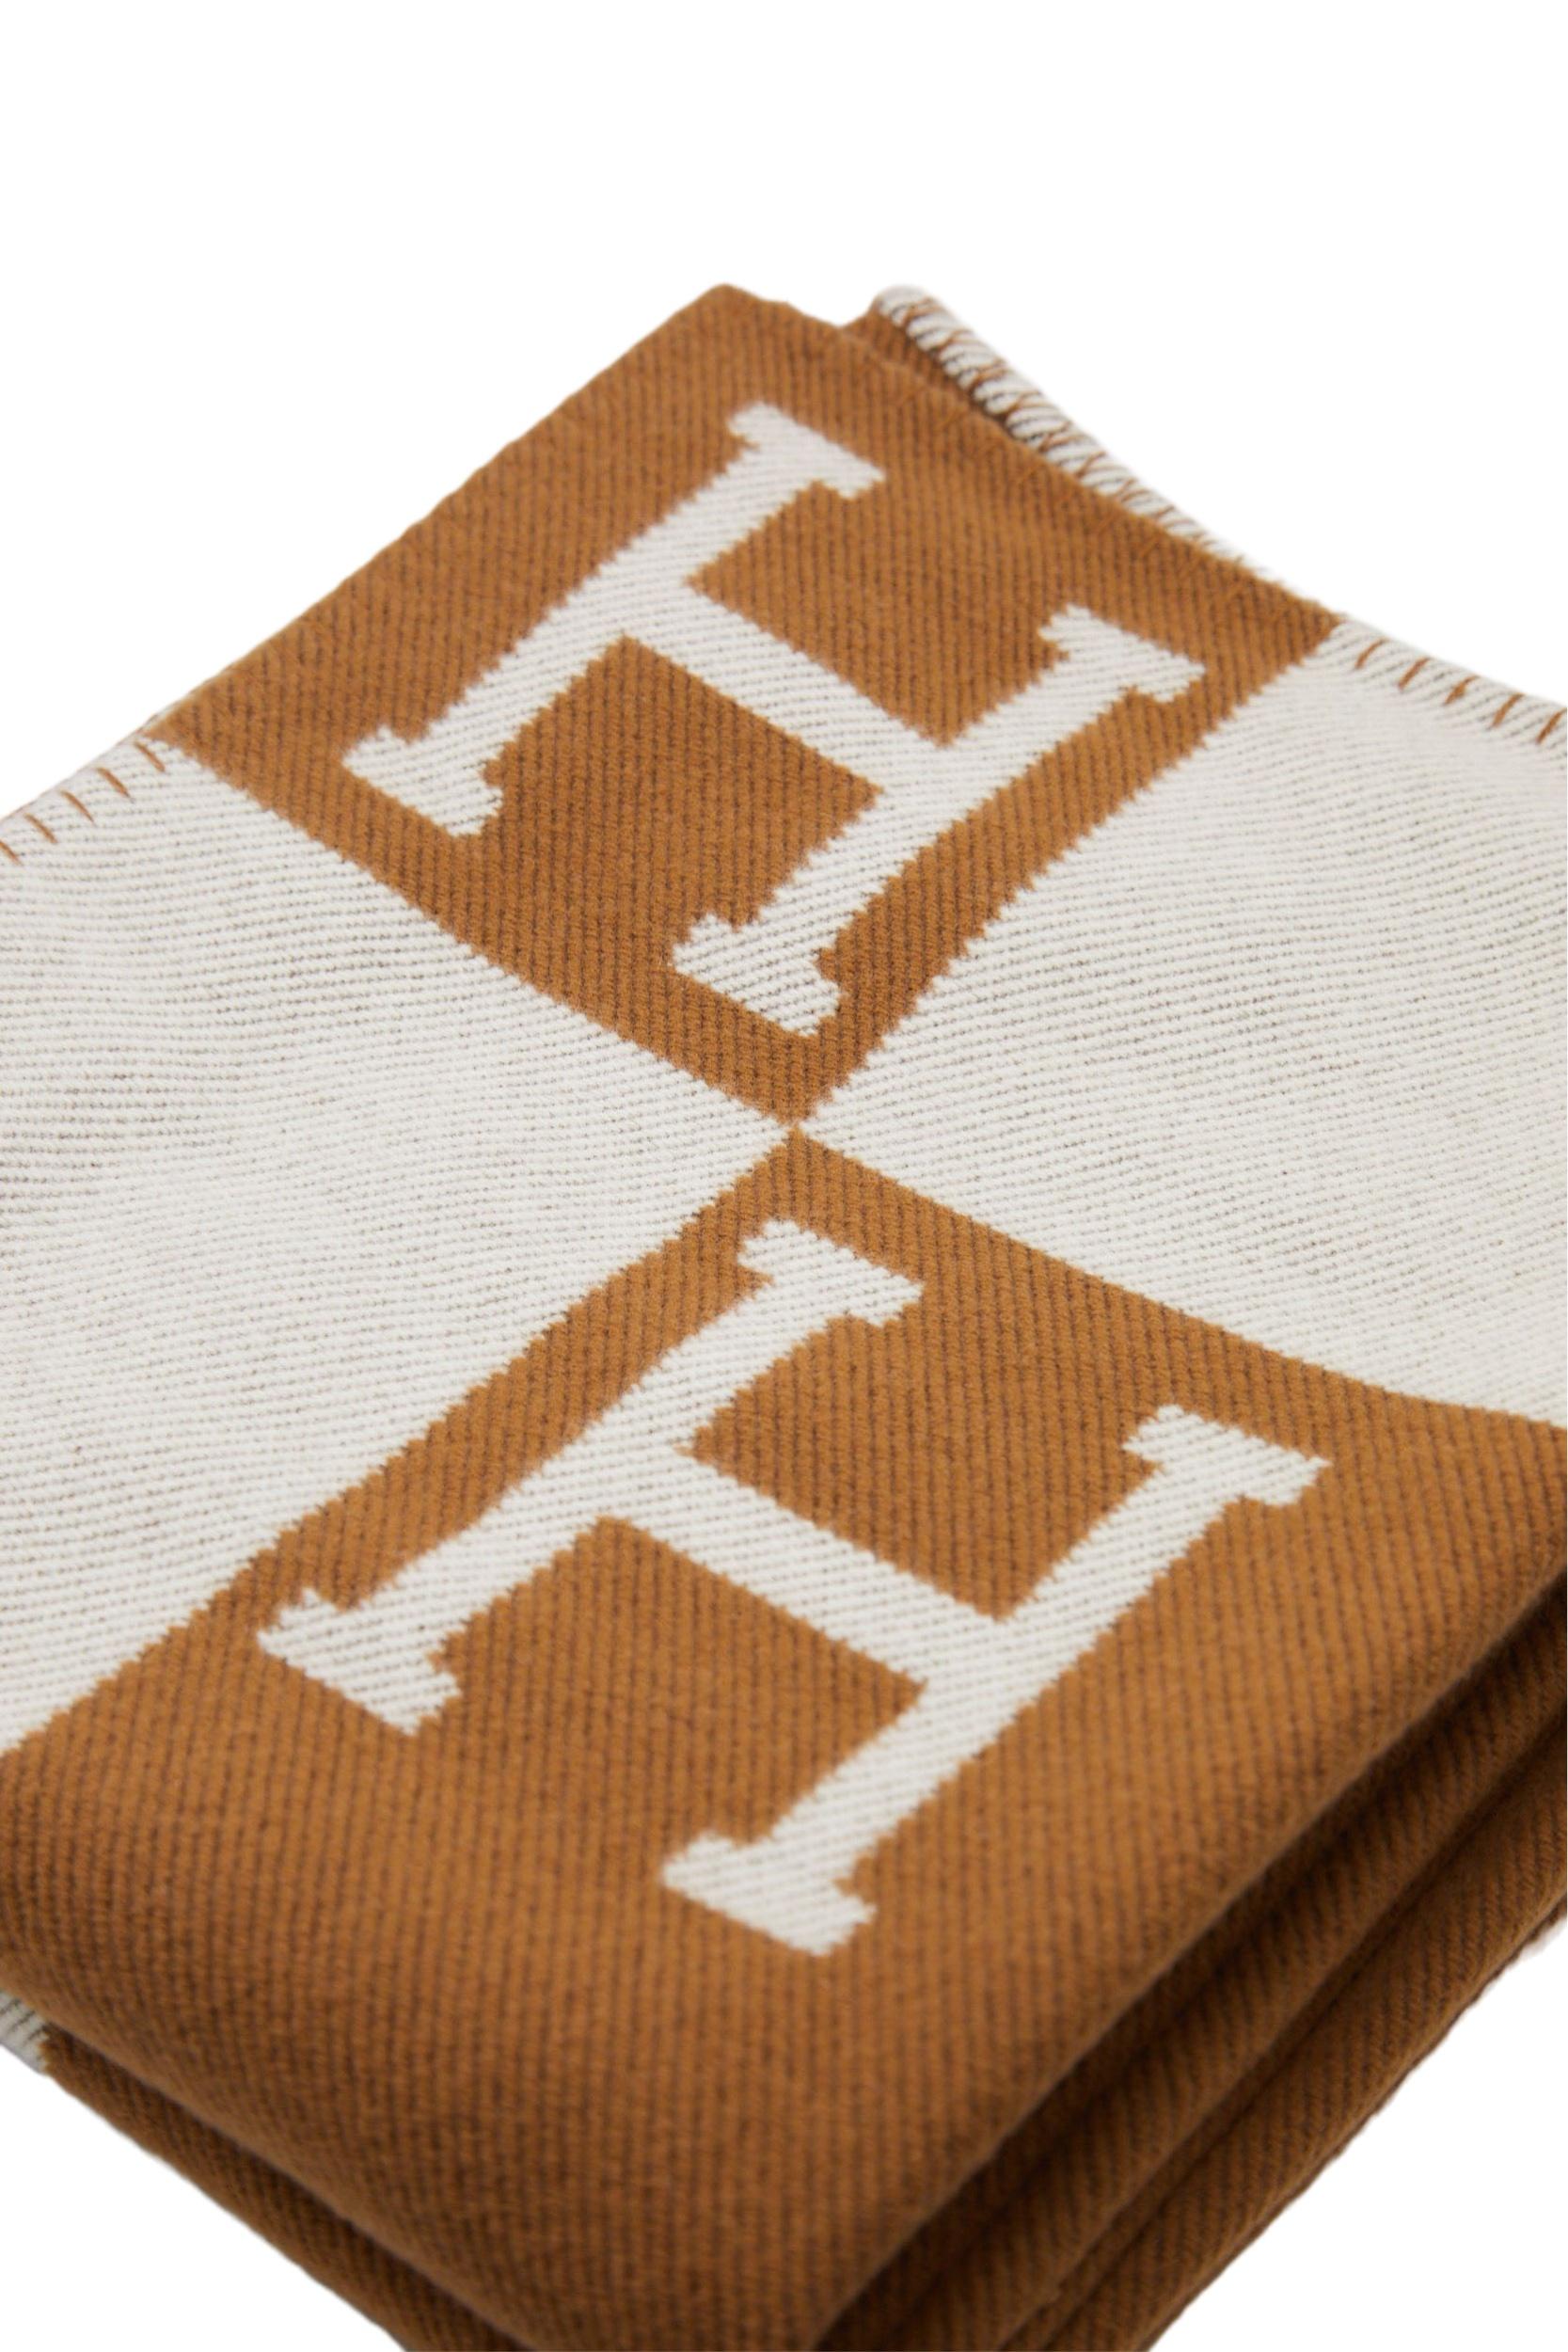 Hermès Avalon throw blanket in Merinos wool and cashmere (90% Merino wool, 10% Cashmere)

Ecru/Camel

Made in Great Britain

Dimensions: L 135 x H 170 cm

*Does not come with a box